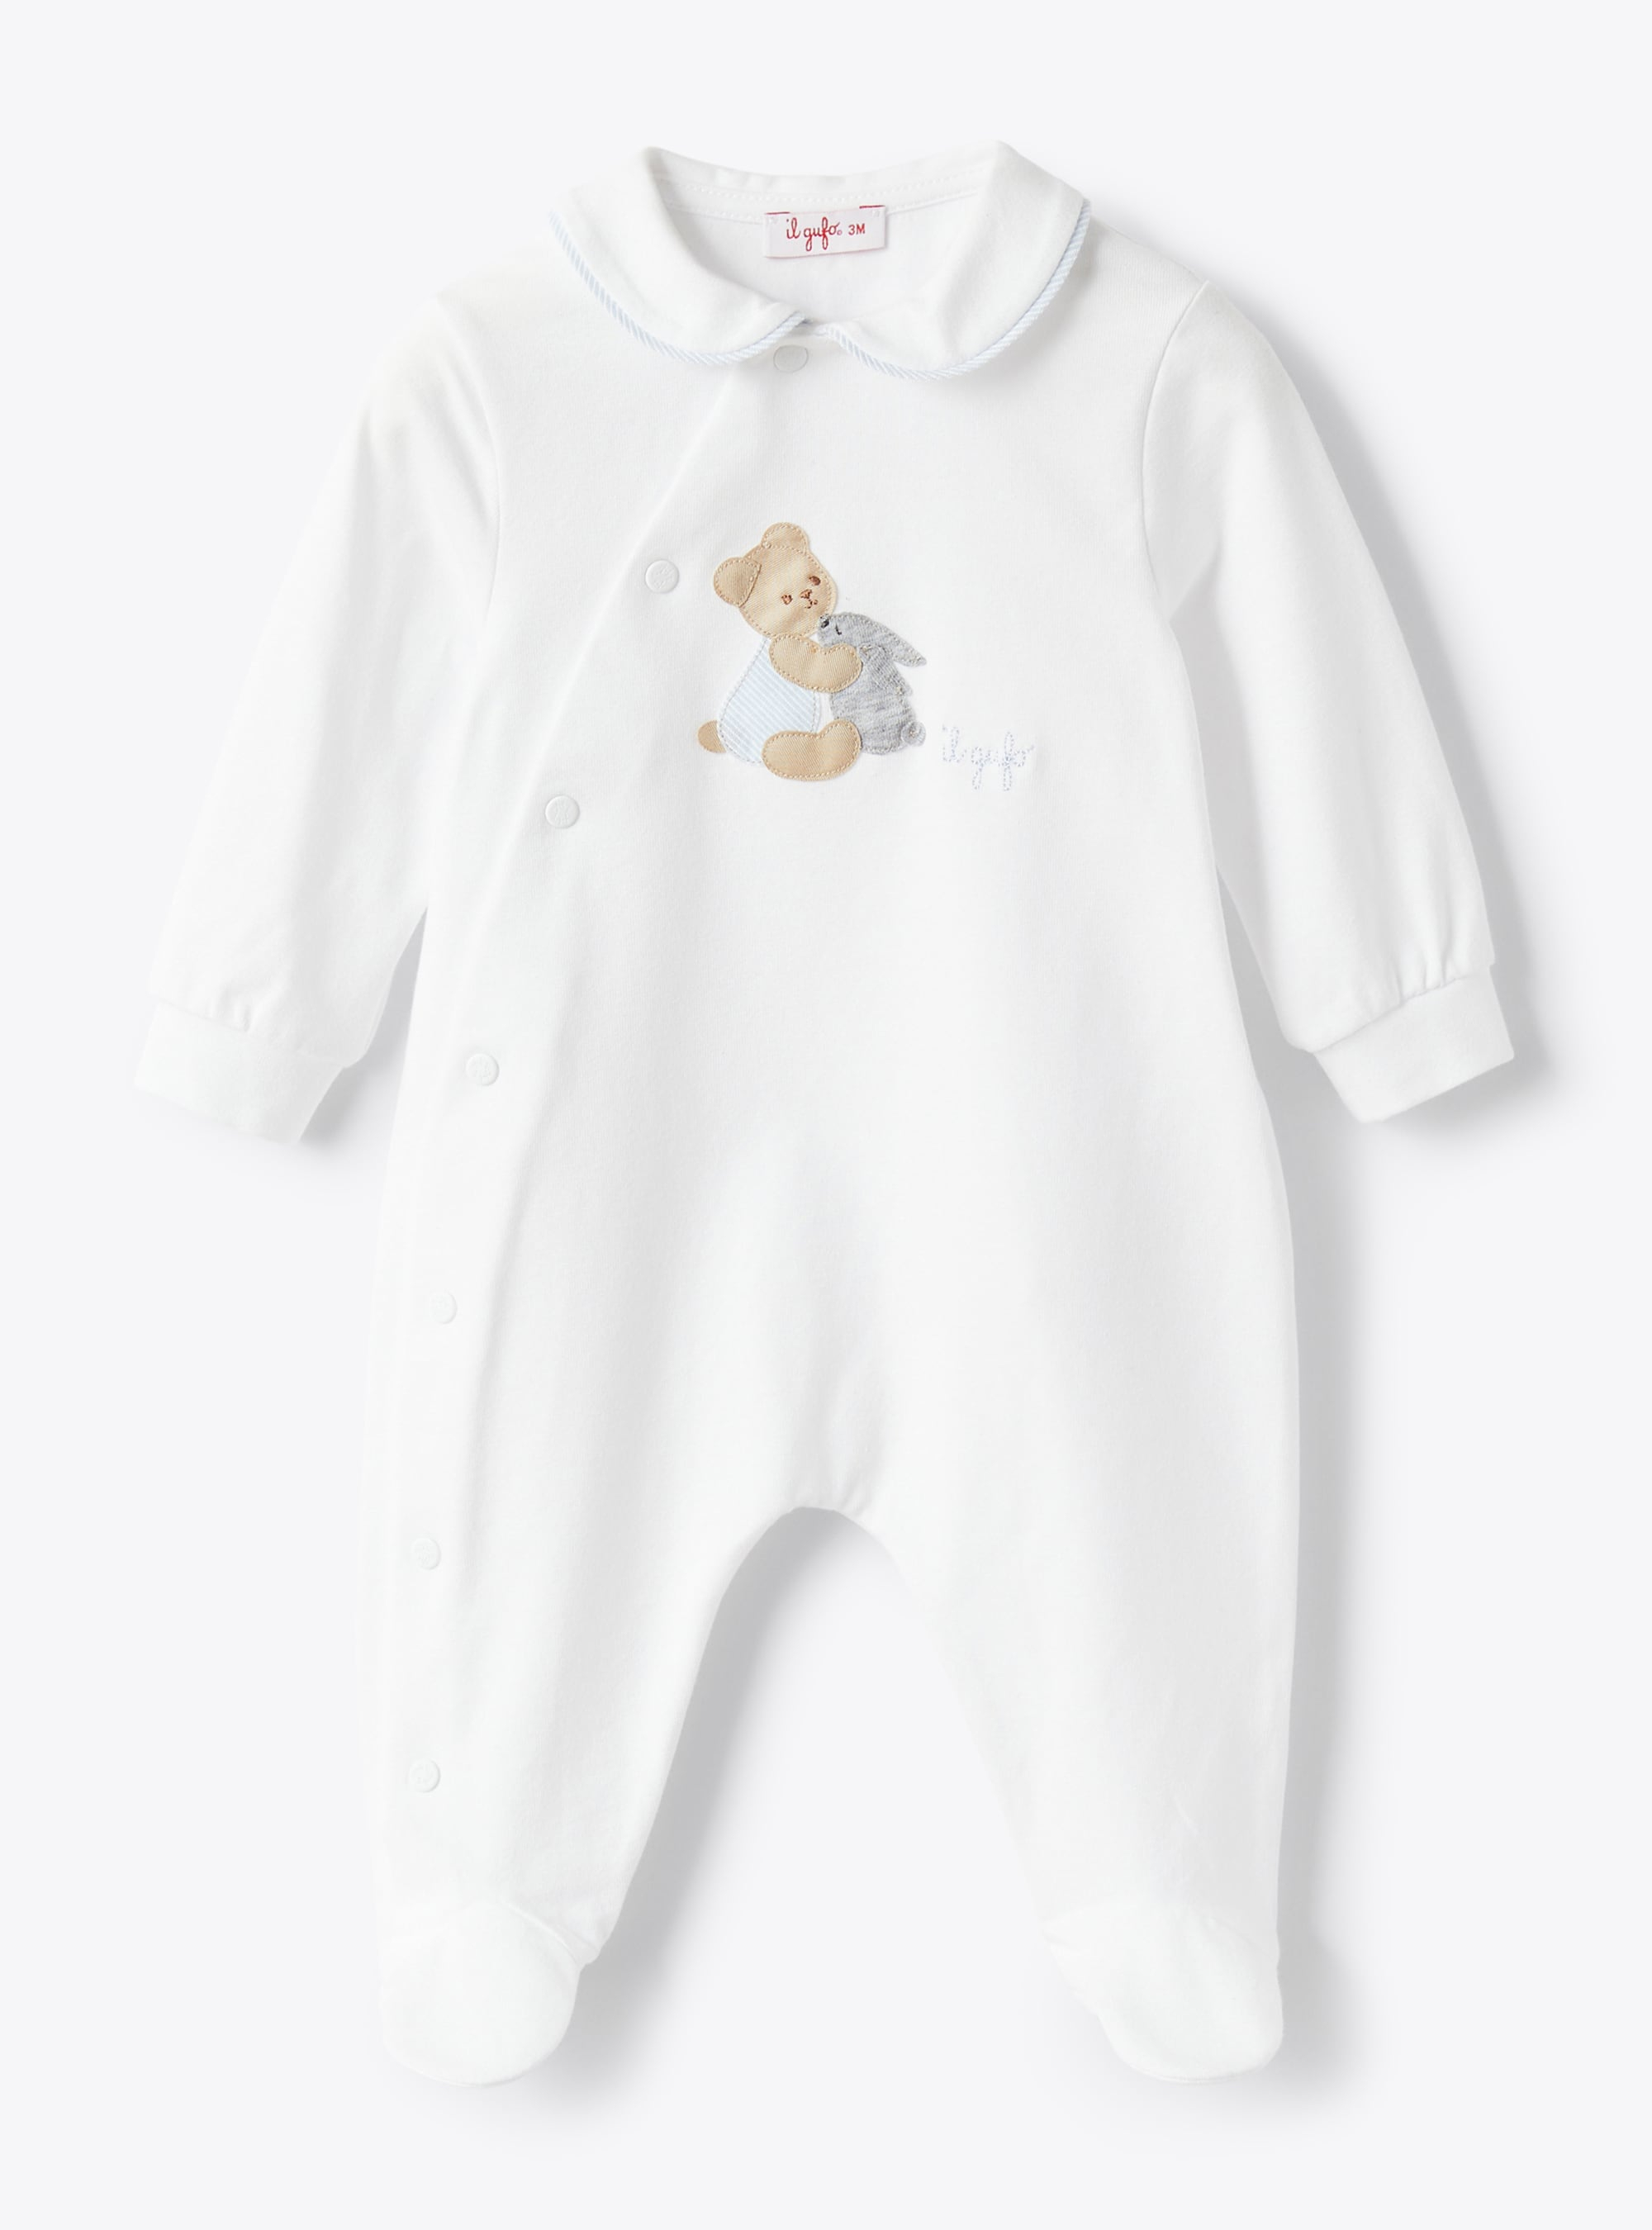 Jersey sleepsuit with bear picture - Babygrows - Il Gufo